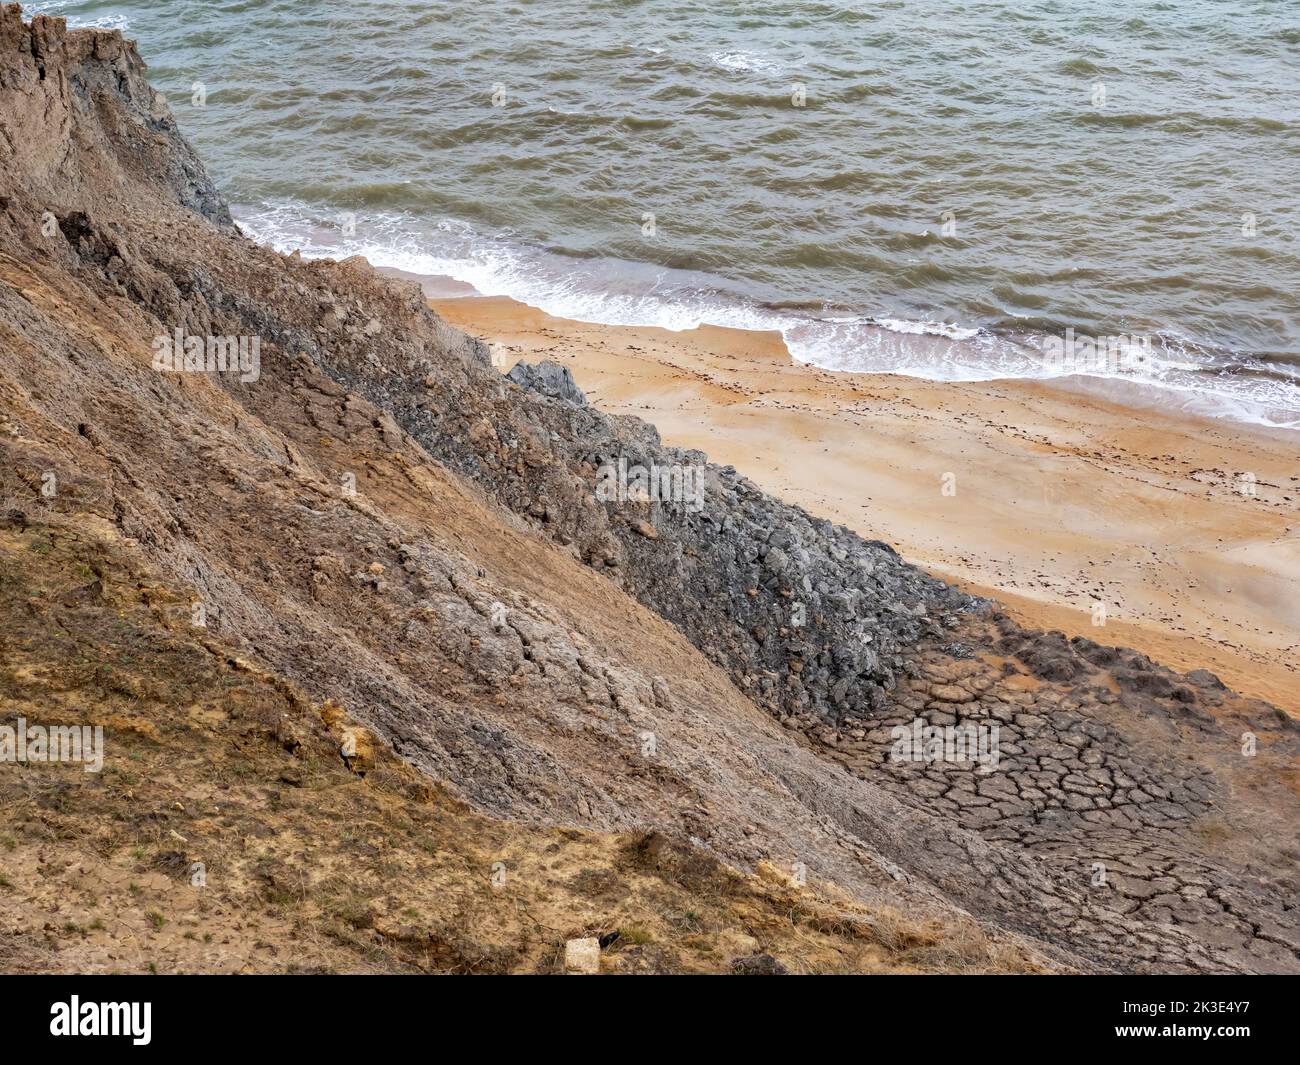 Collapsing soft coastal cliffs at Atherfield point on the Isle of White, UK. Stock Photo